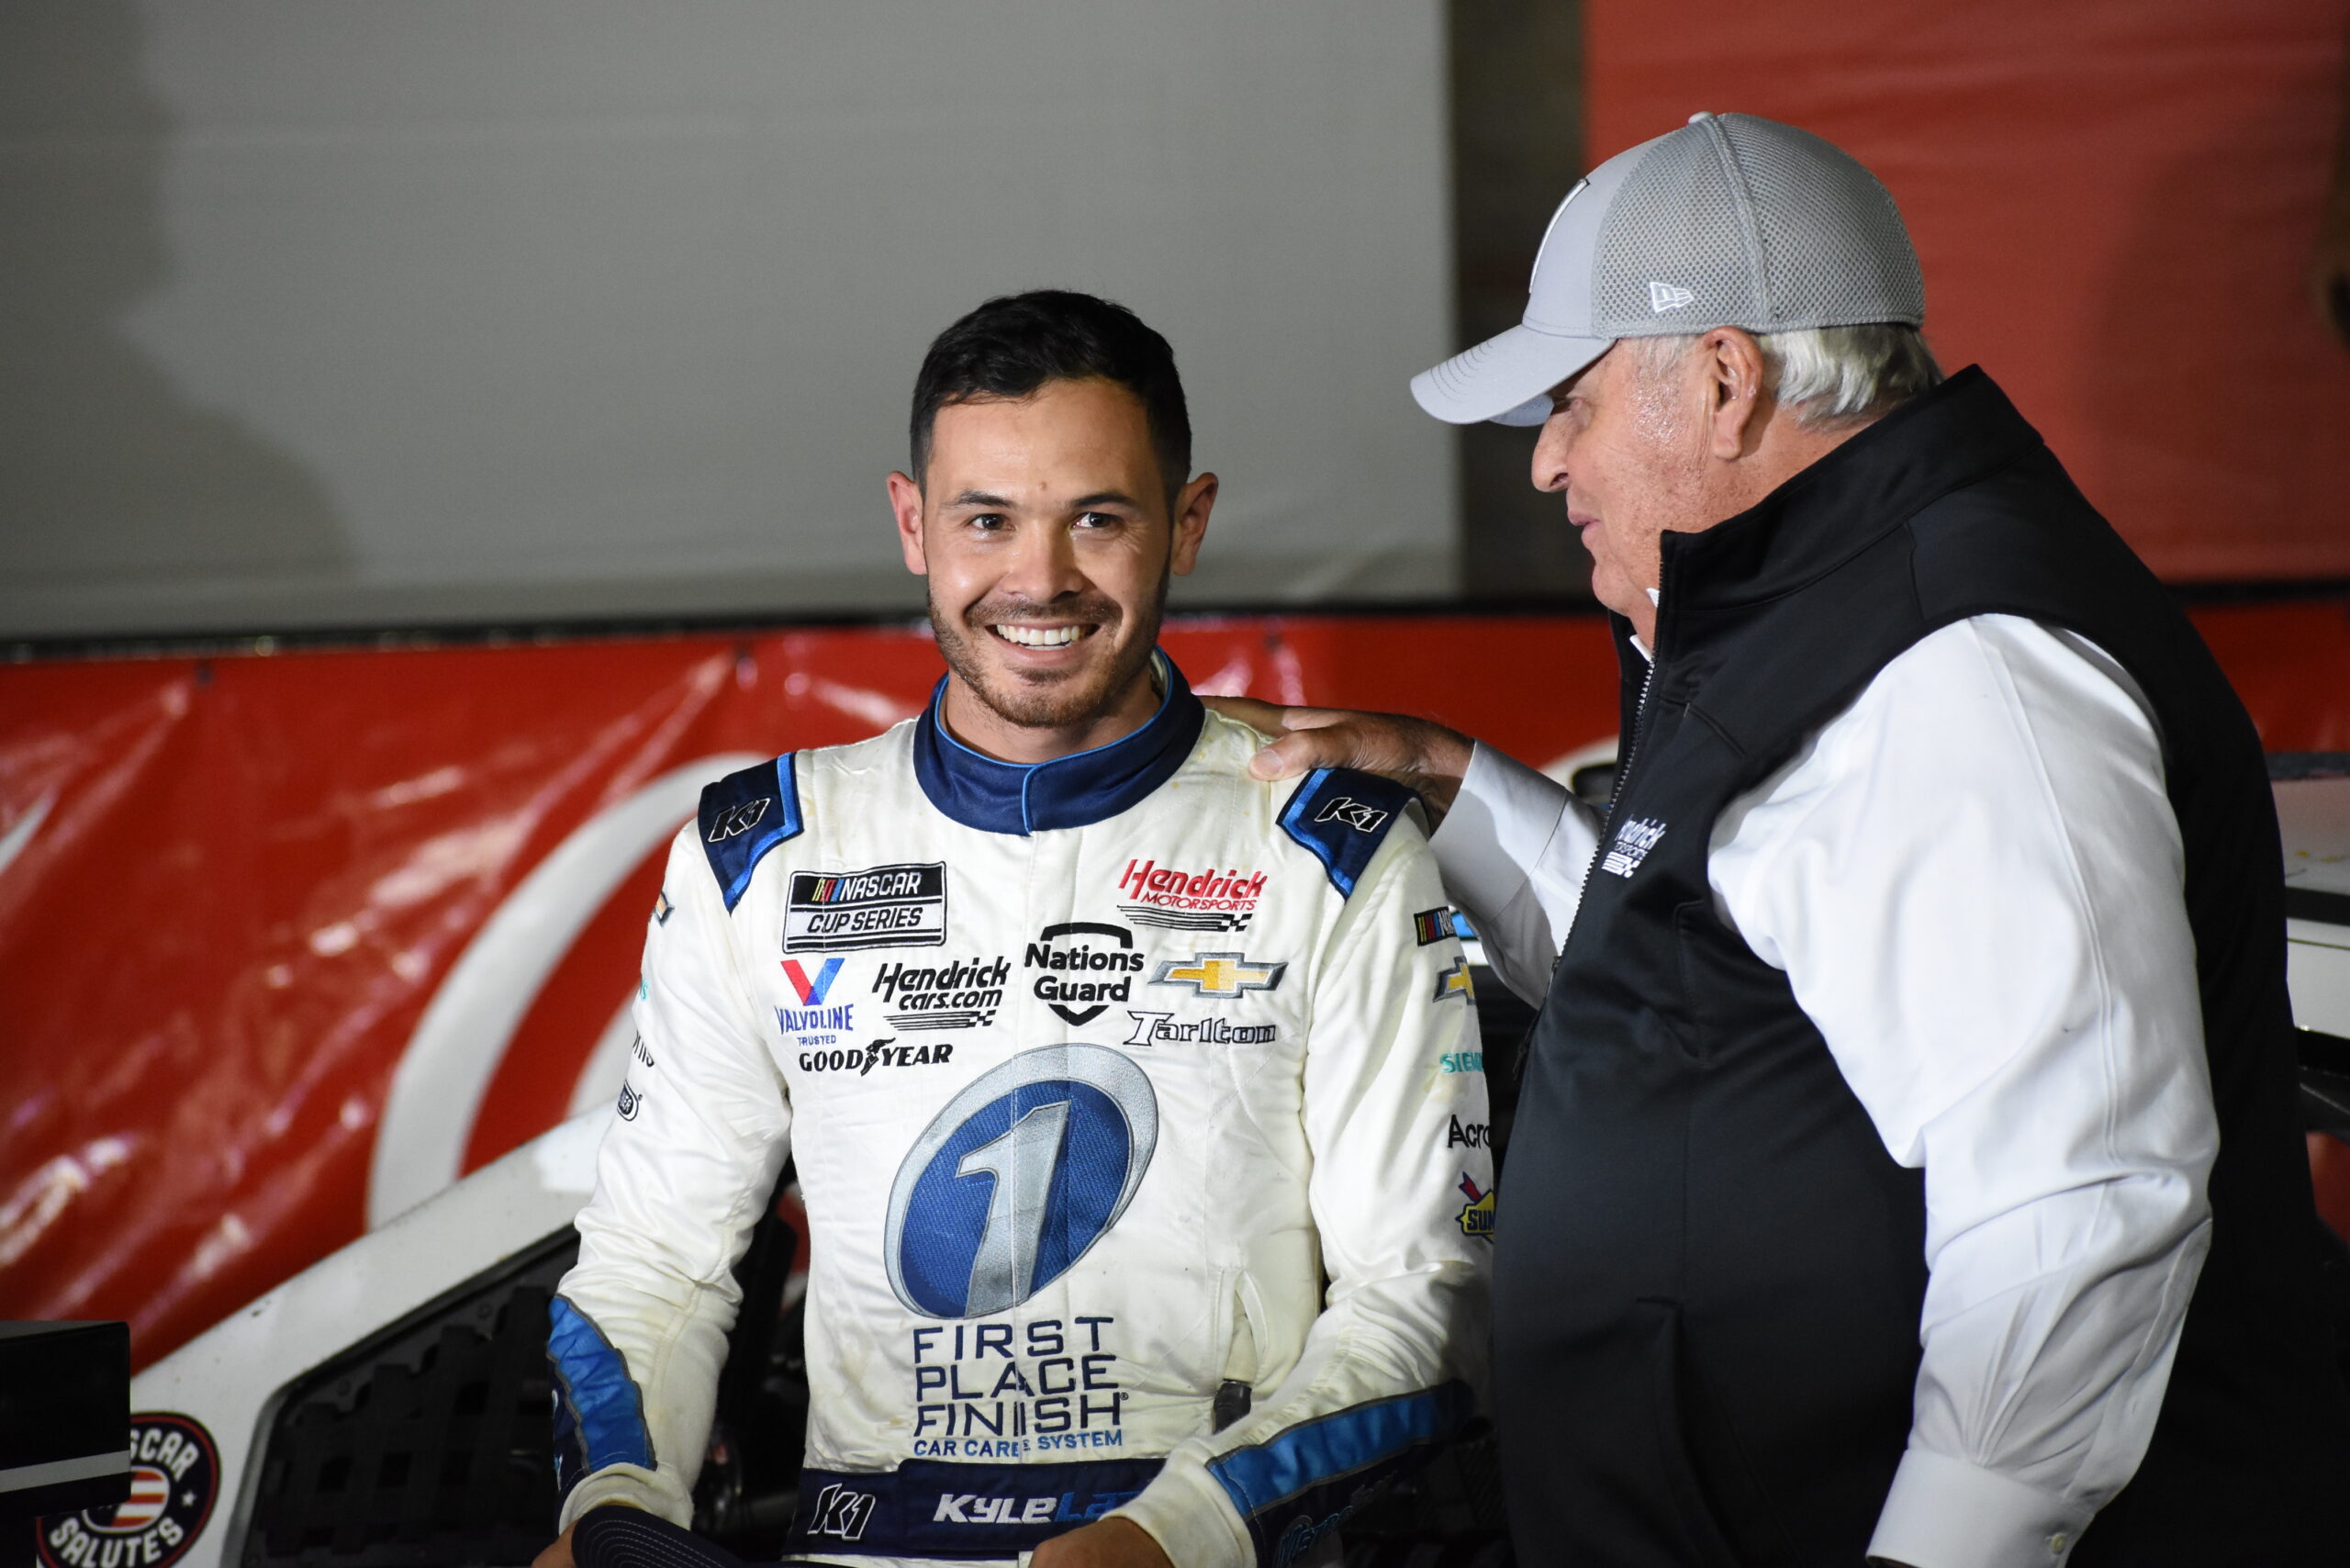 "I think the biggest thing is the respect that he shows everybody." - Kyle Larson about Rick Hendrick (Photo: Michael Guariglia | The Podium Finish)